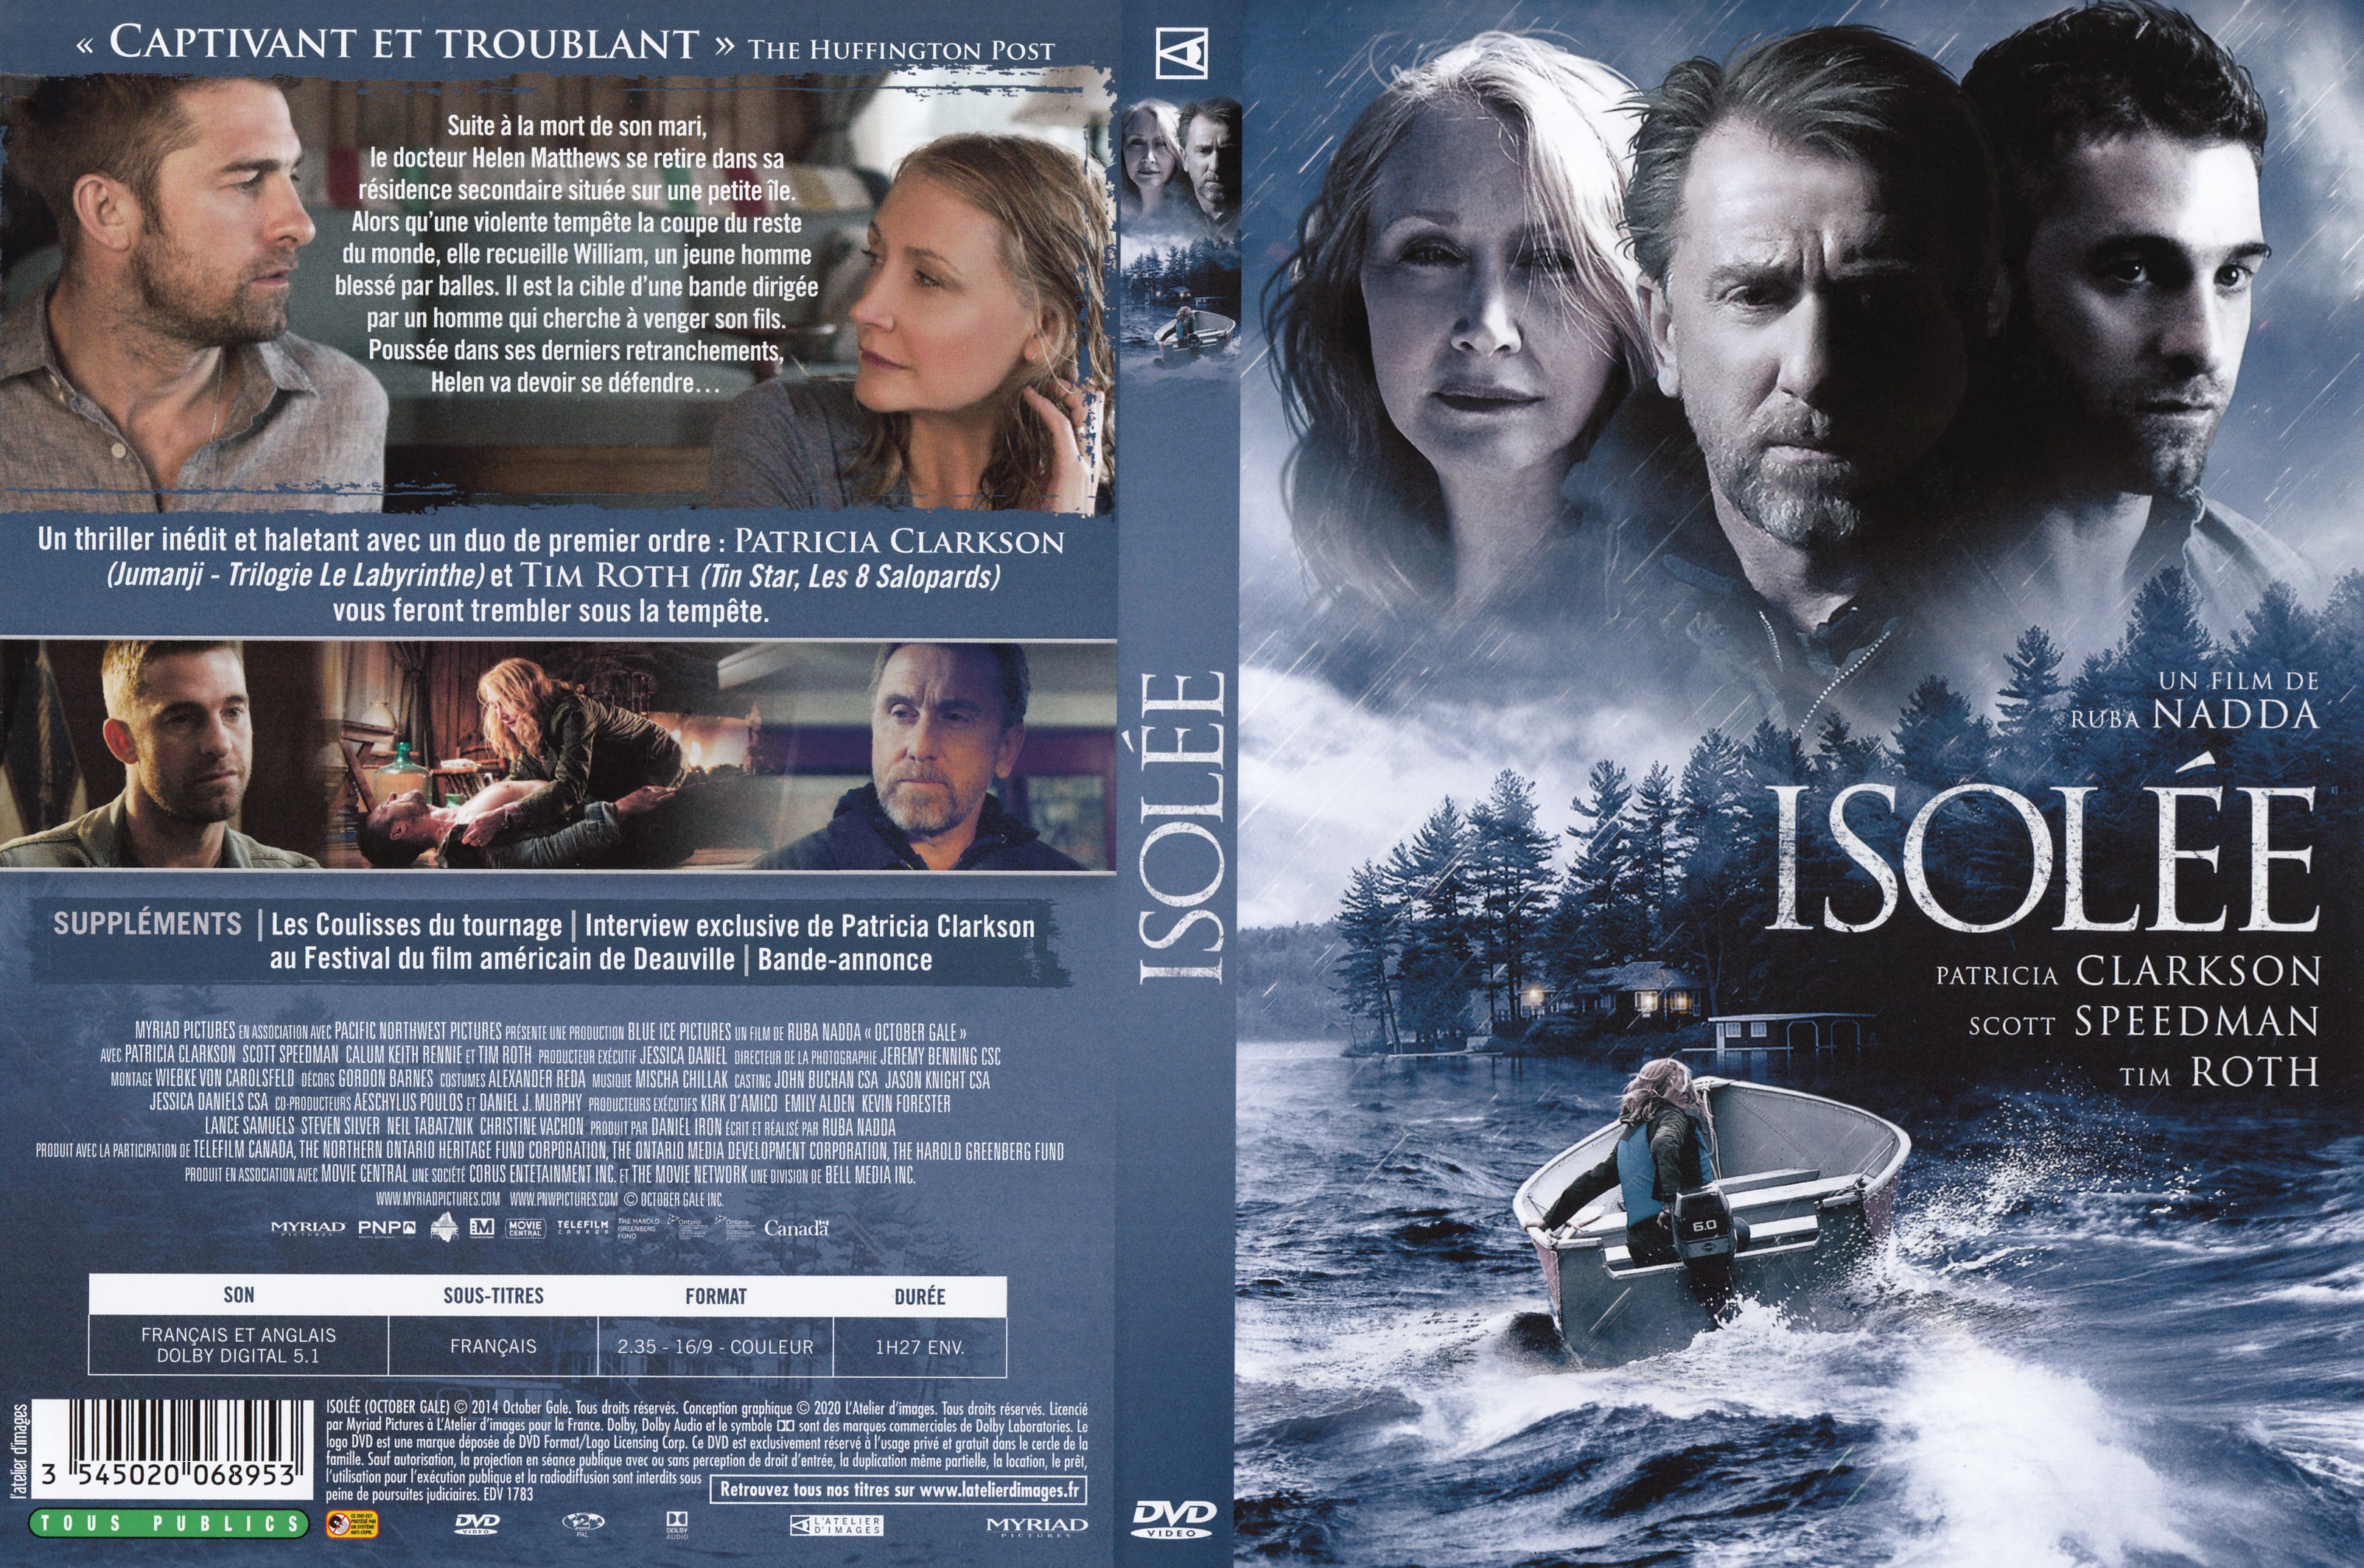 Jaquette DVD Isole